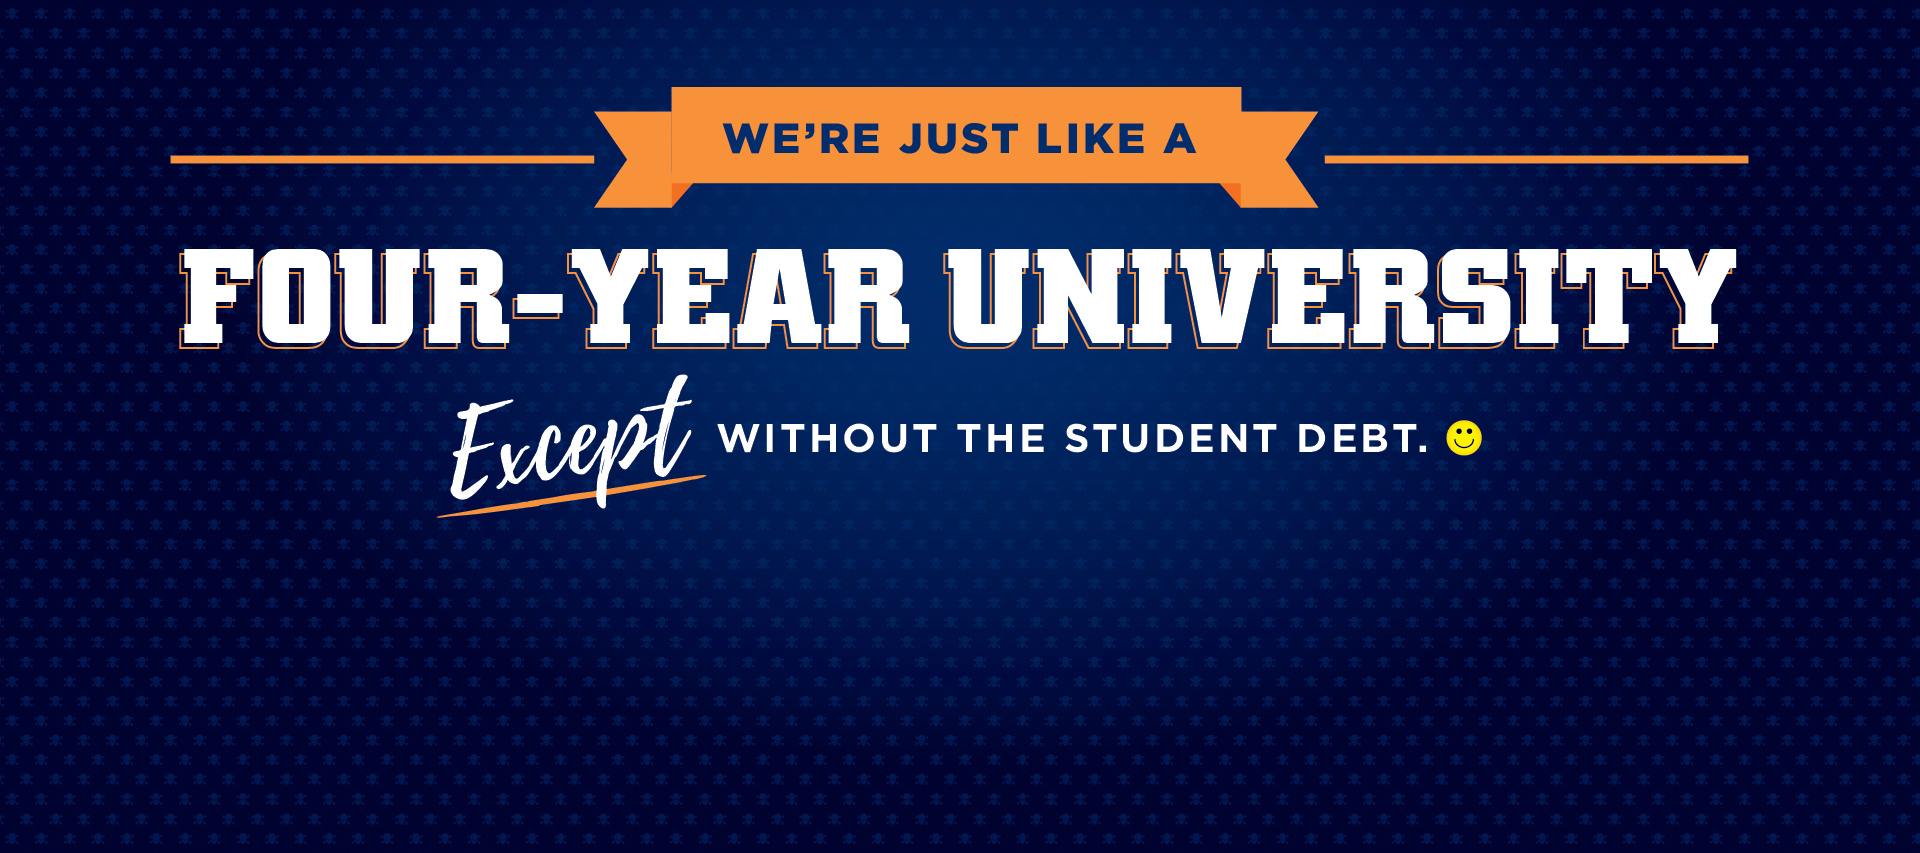 Text: Just like a 4-year university without the student debt.